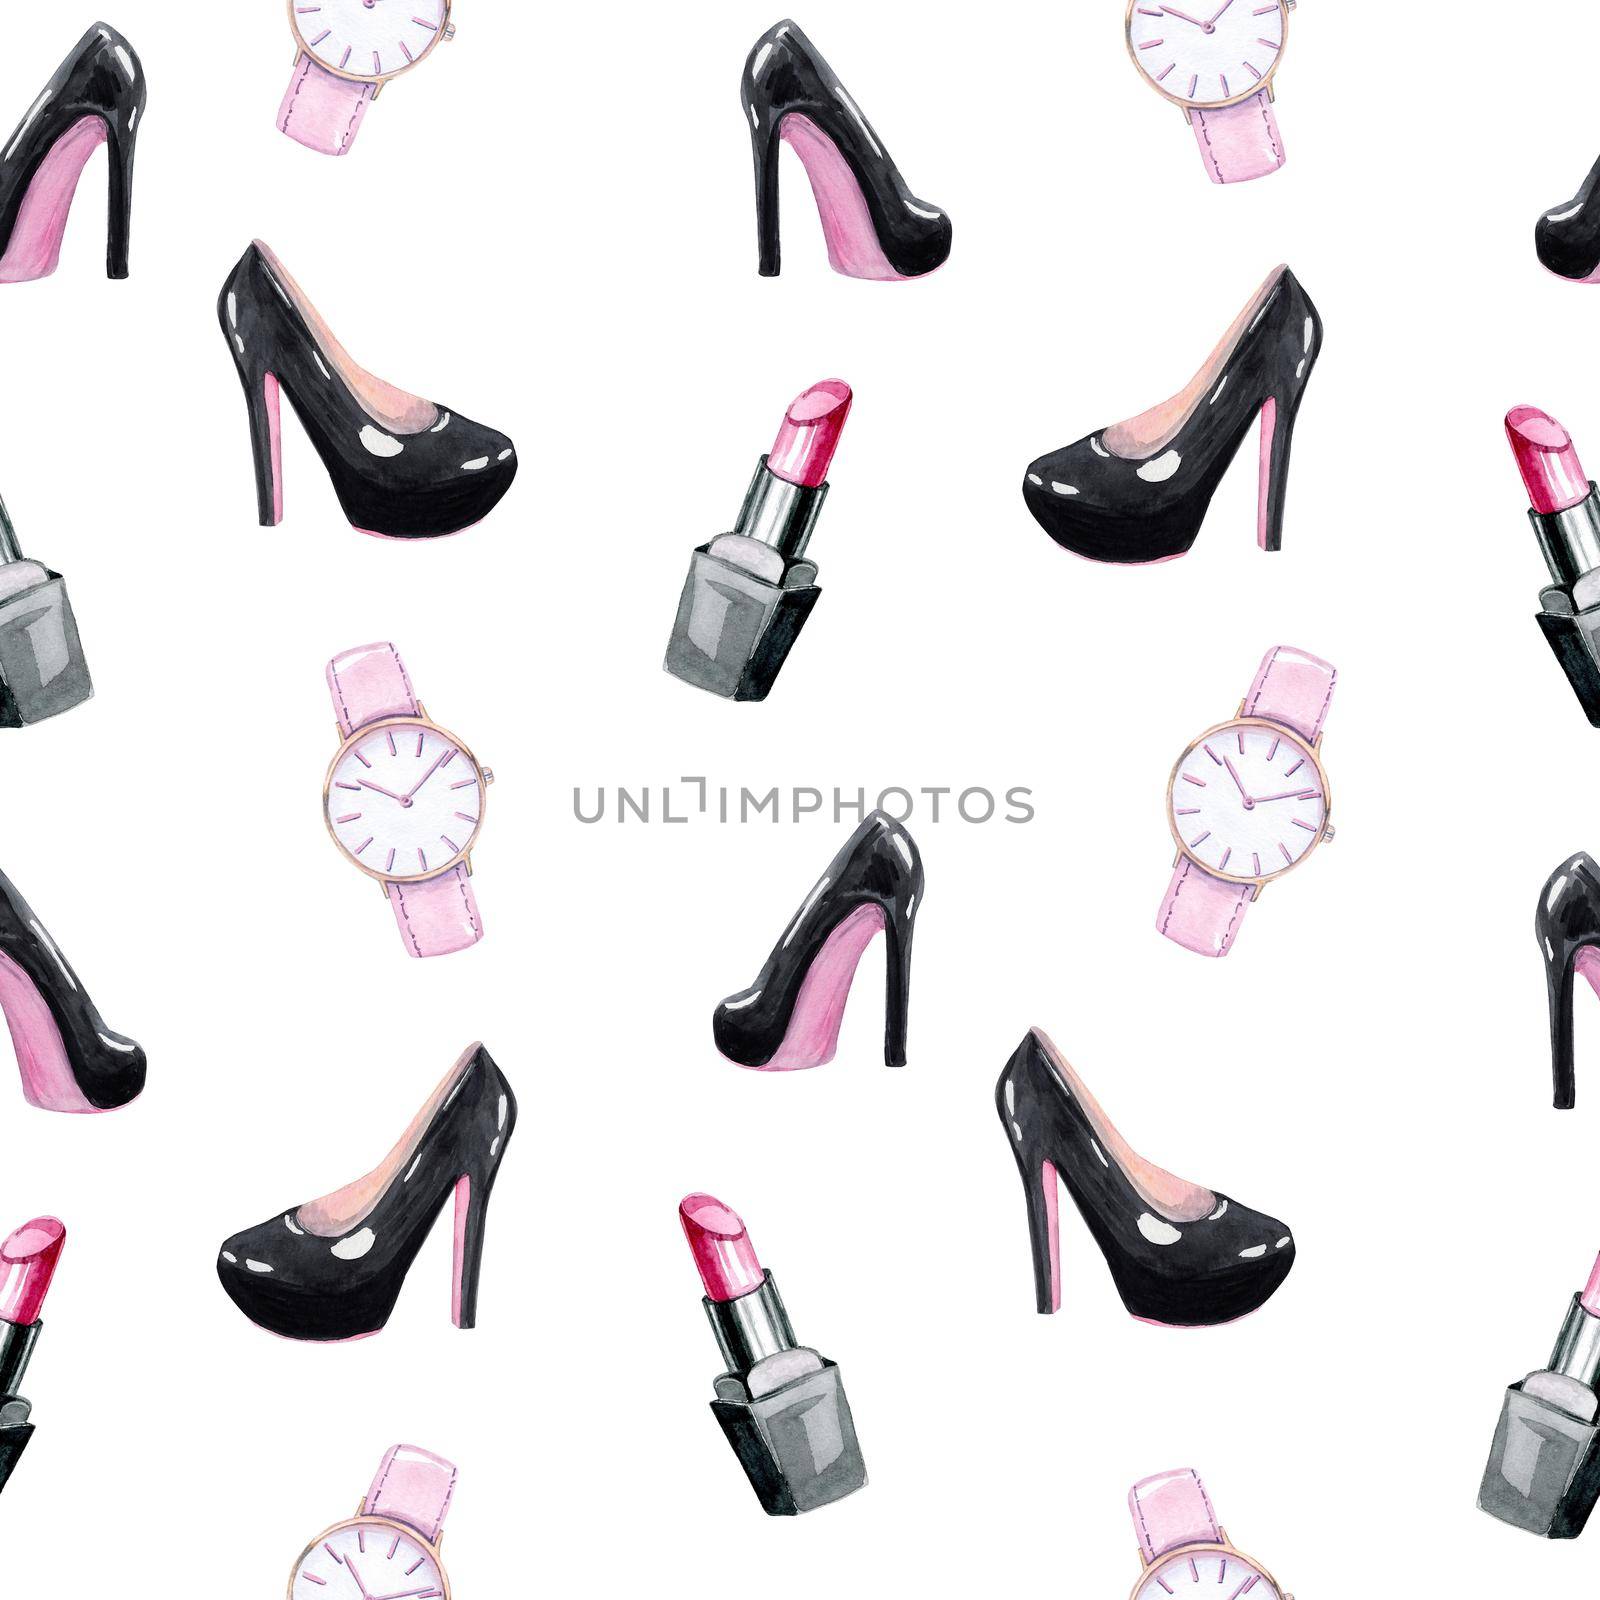 watercolor woman black shoes and watches seamless pattern on white background. Fashion accessories print for fabric, wrapping, wallpaper